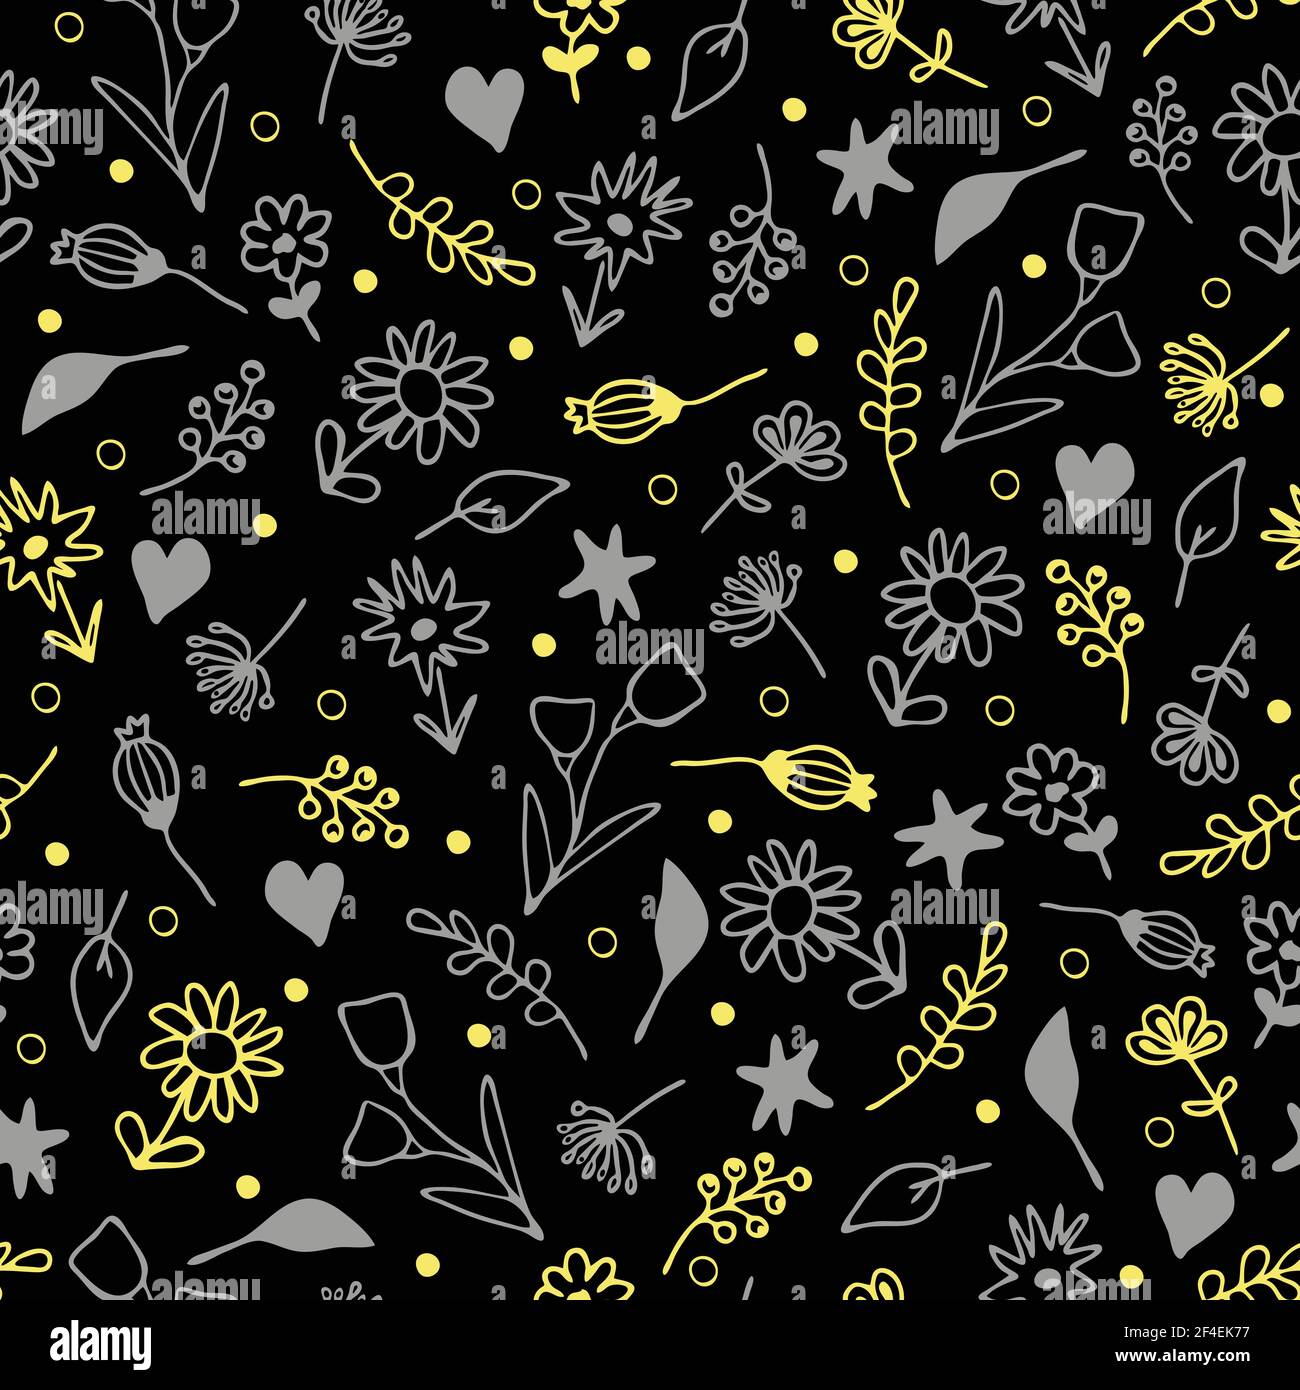 Seamless Vector Pattern With Small Flowers On Black Background